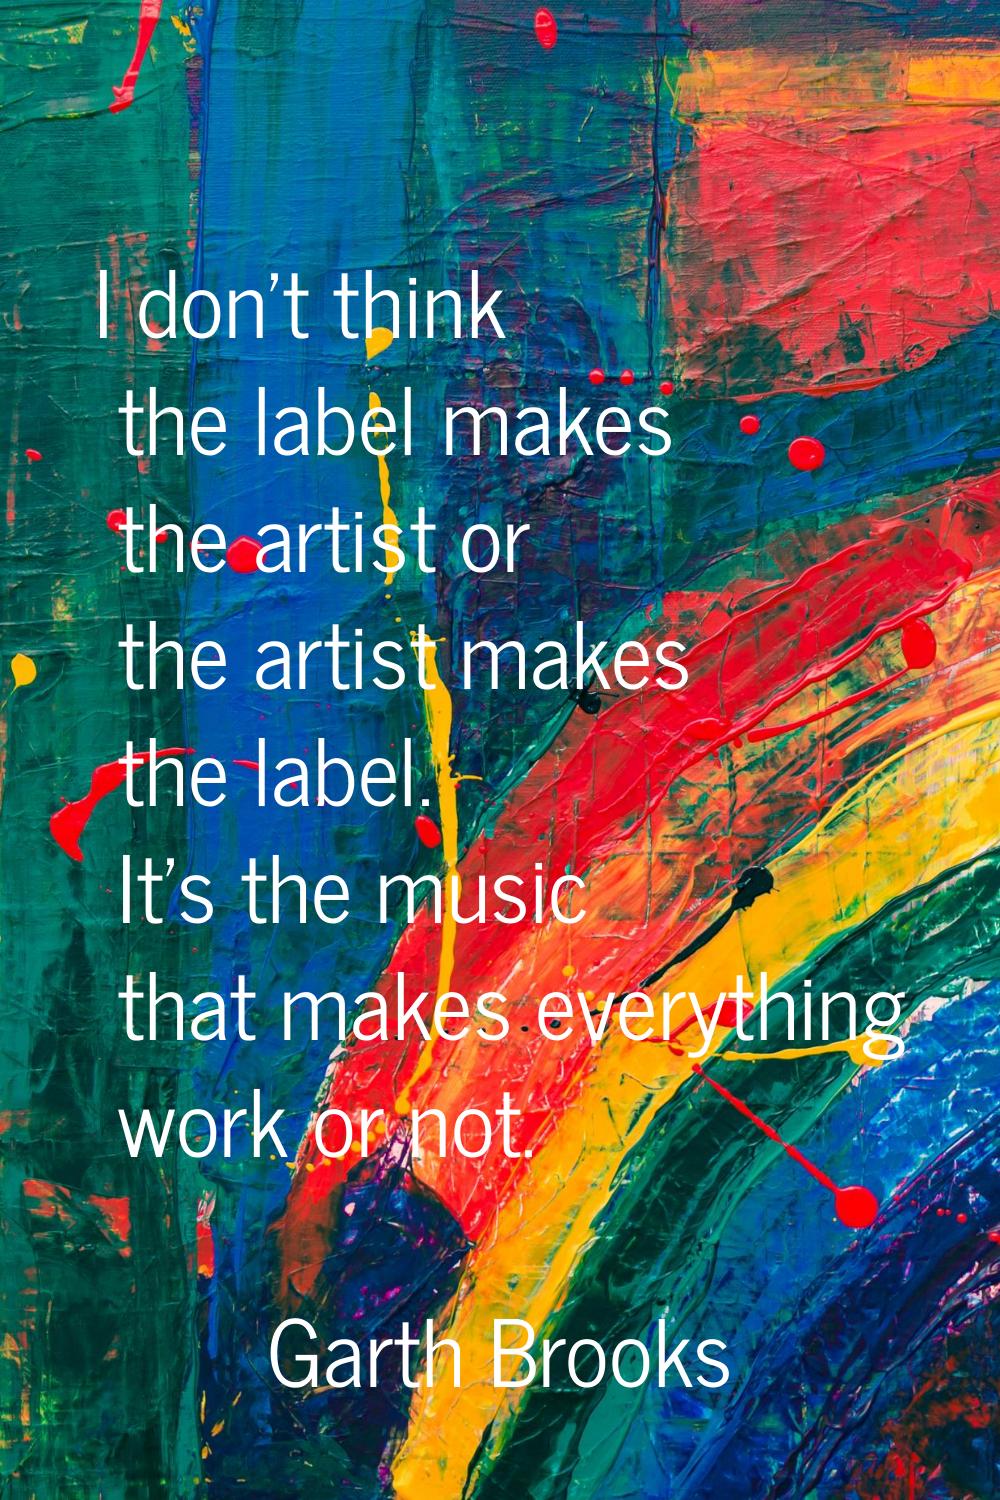 I don't think the label makes the artist or the artist makes the label. It's the music that makes e